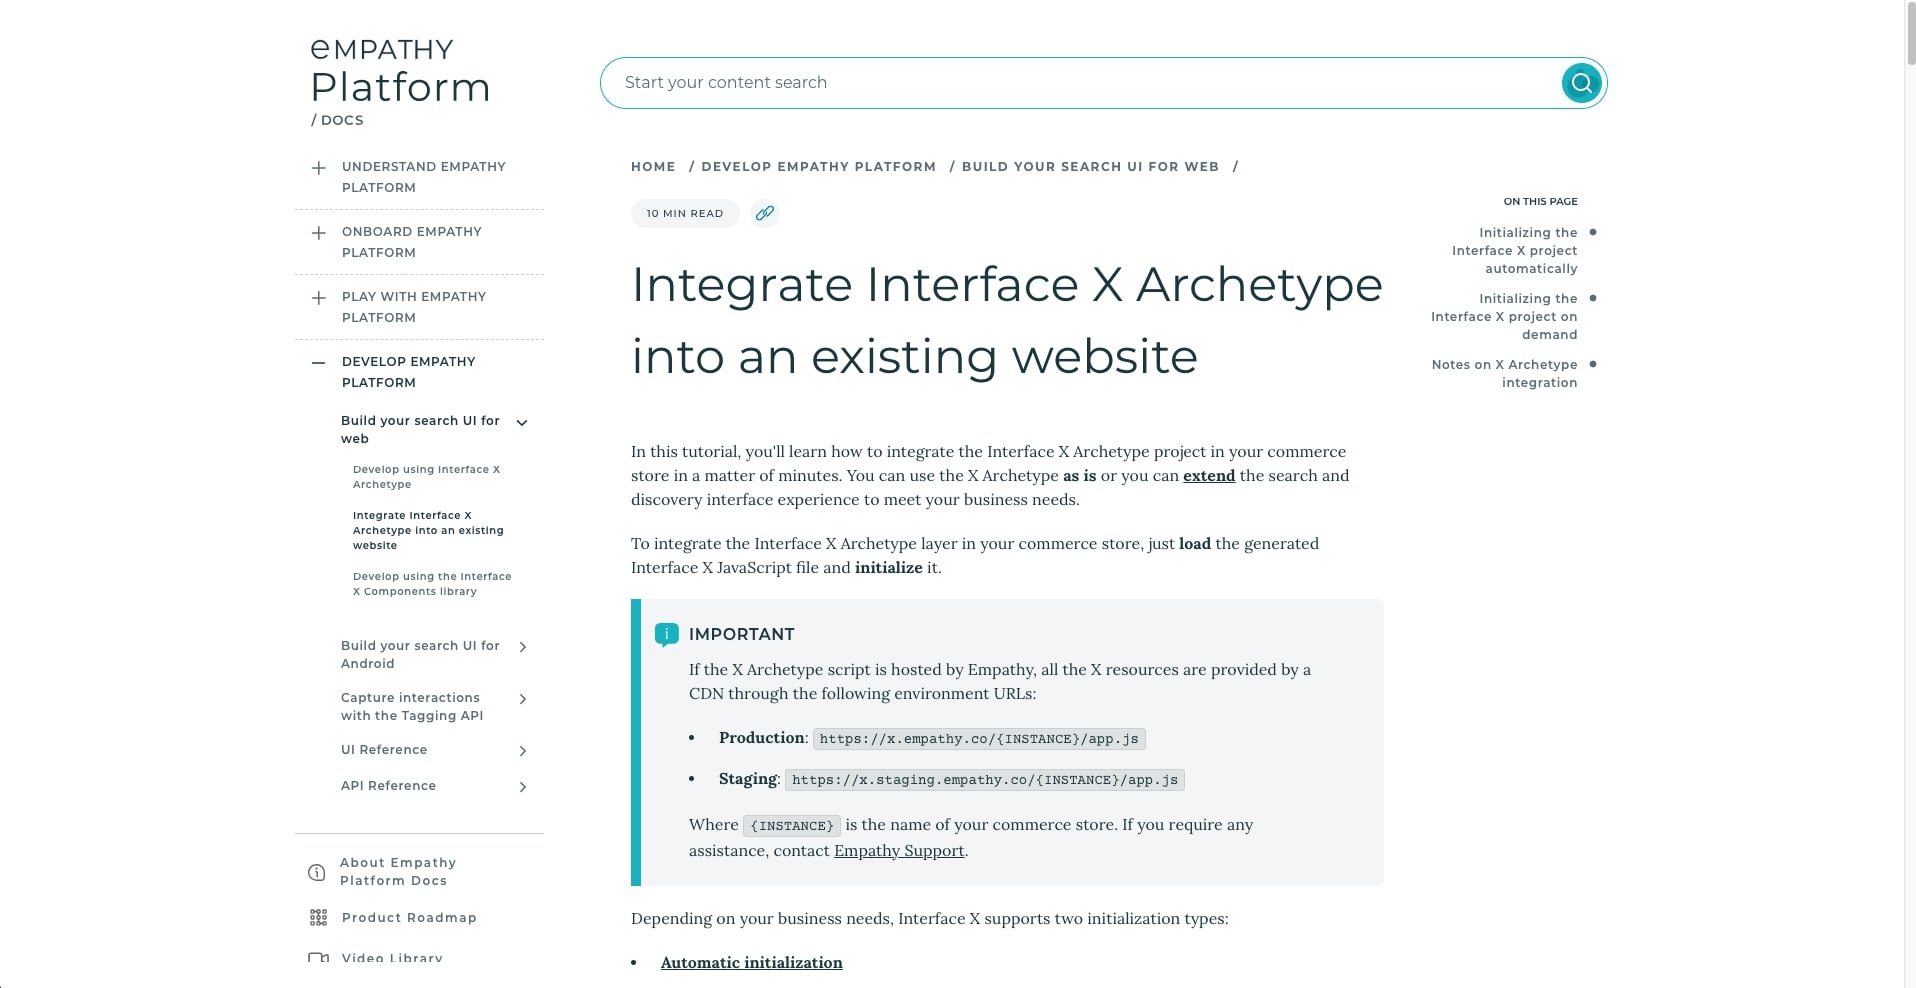 Integrating X Archetype in your commerce store in a minute!